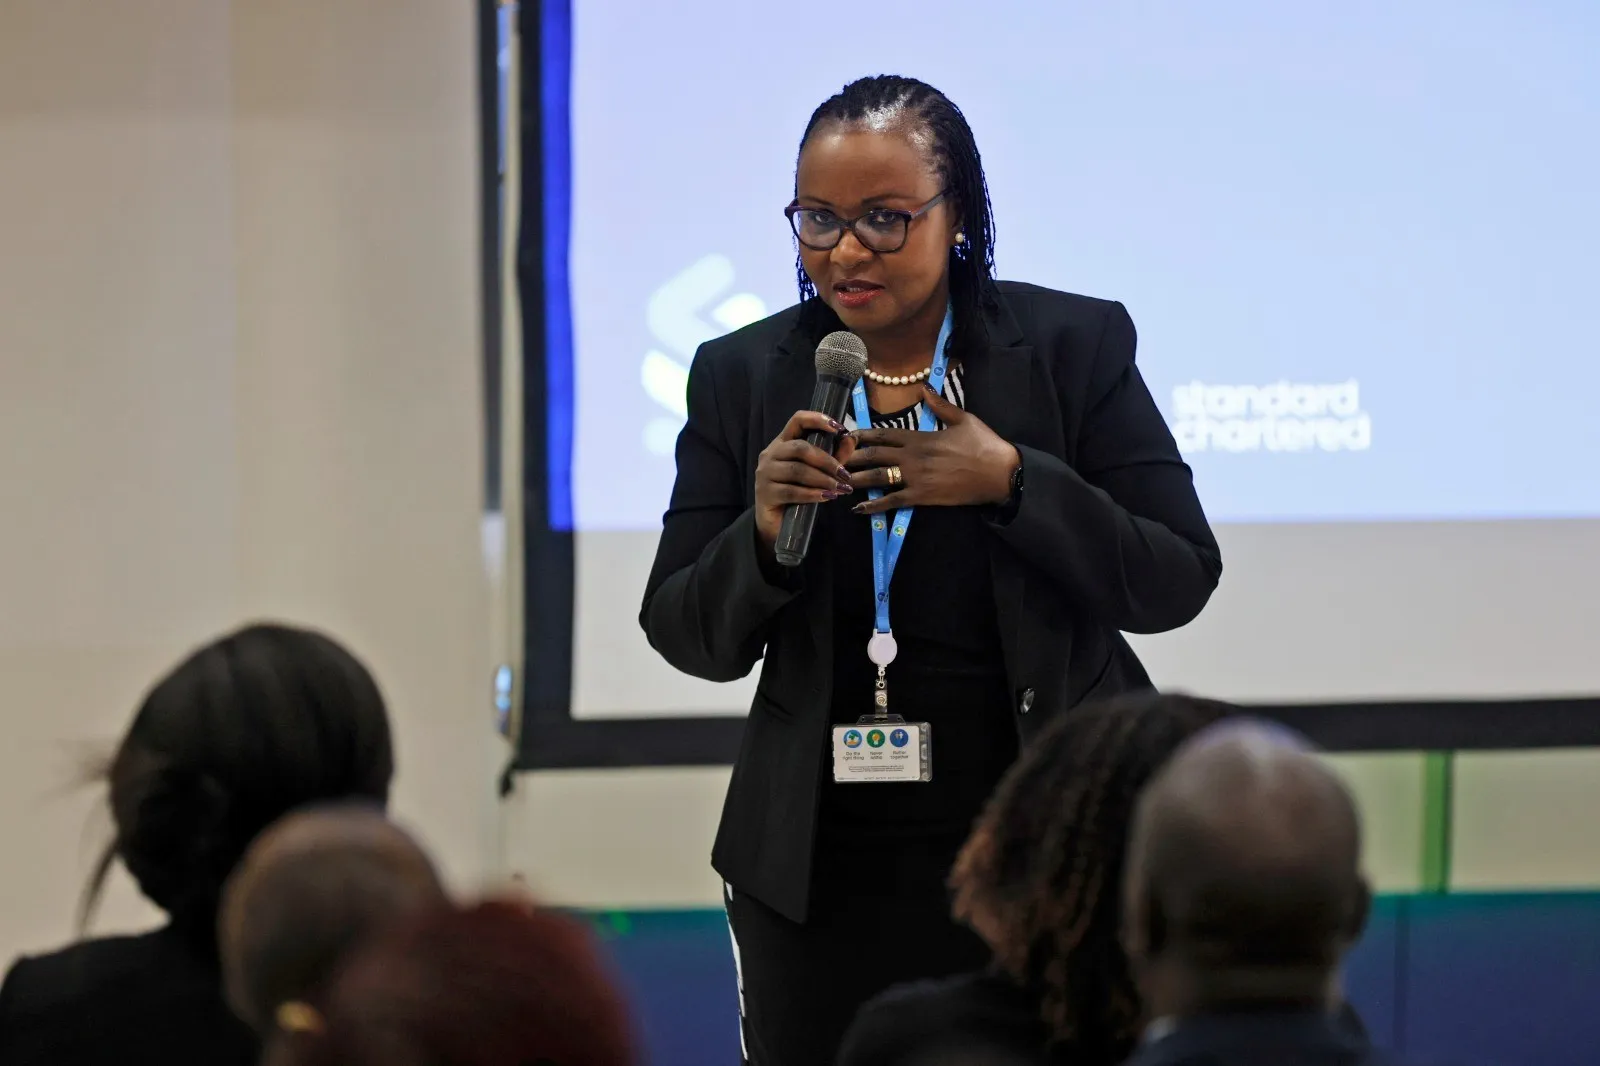 Edith Chumba, the Head of Consumer, Private and Business Banking Kenya and East Africa at Standard Chartered